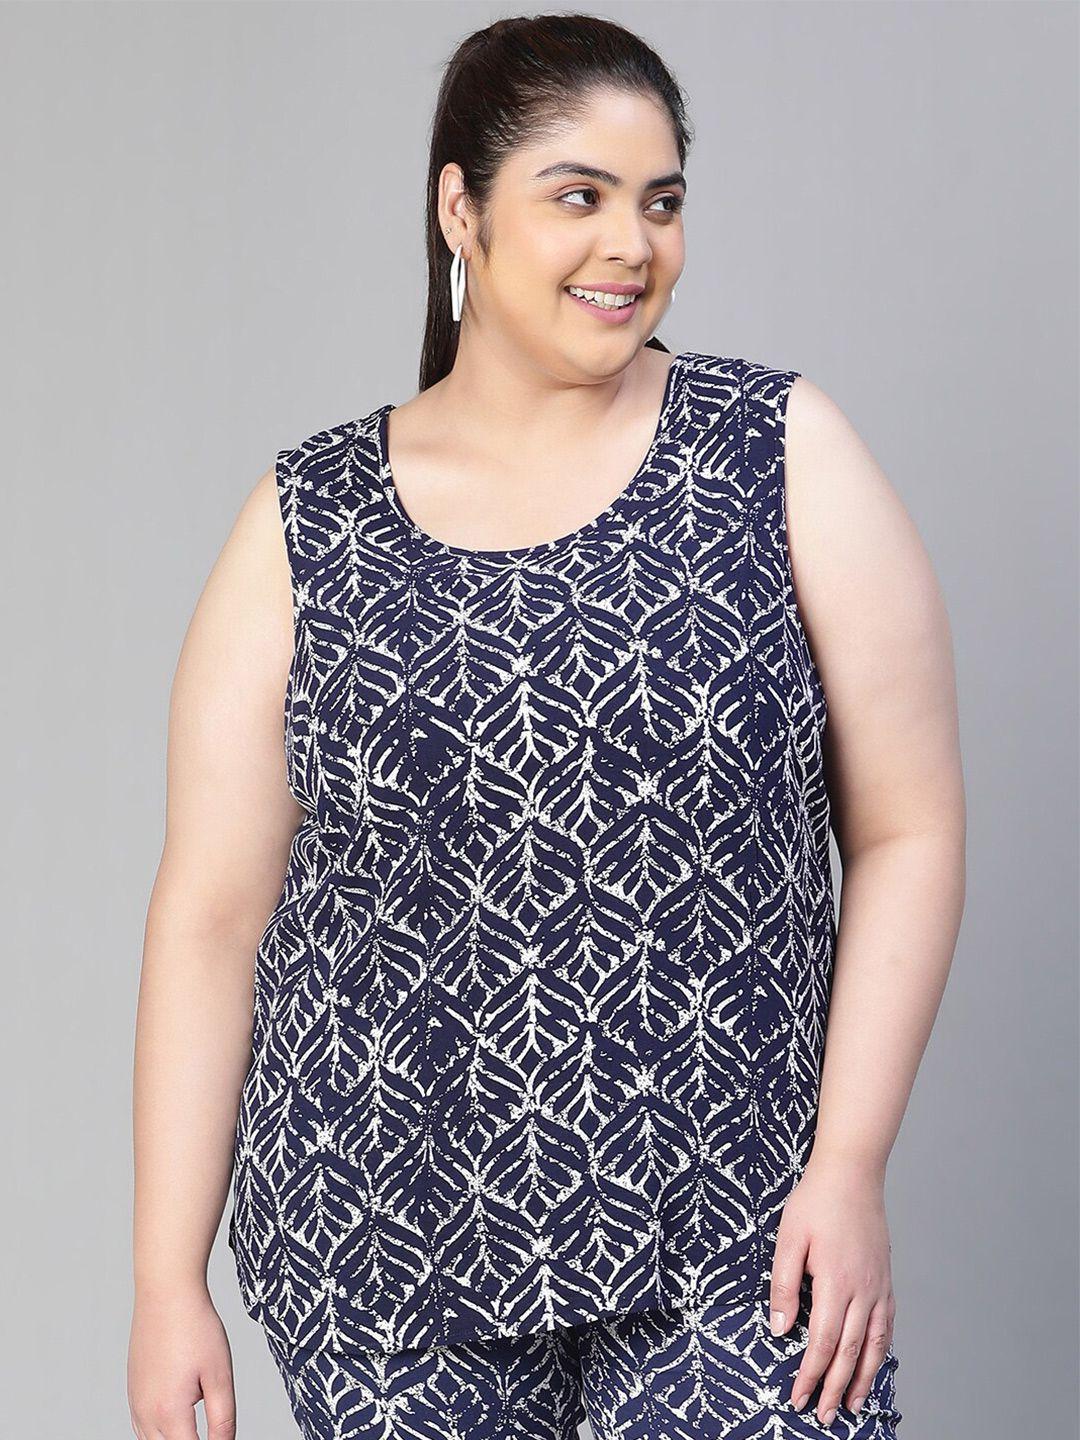 oxolloxo plus size floral printed round neck top